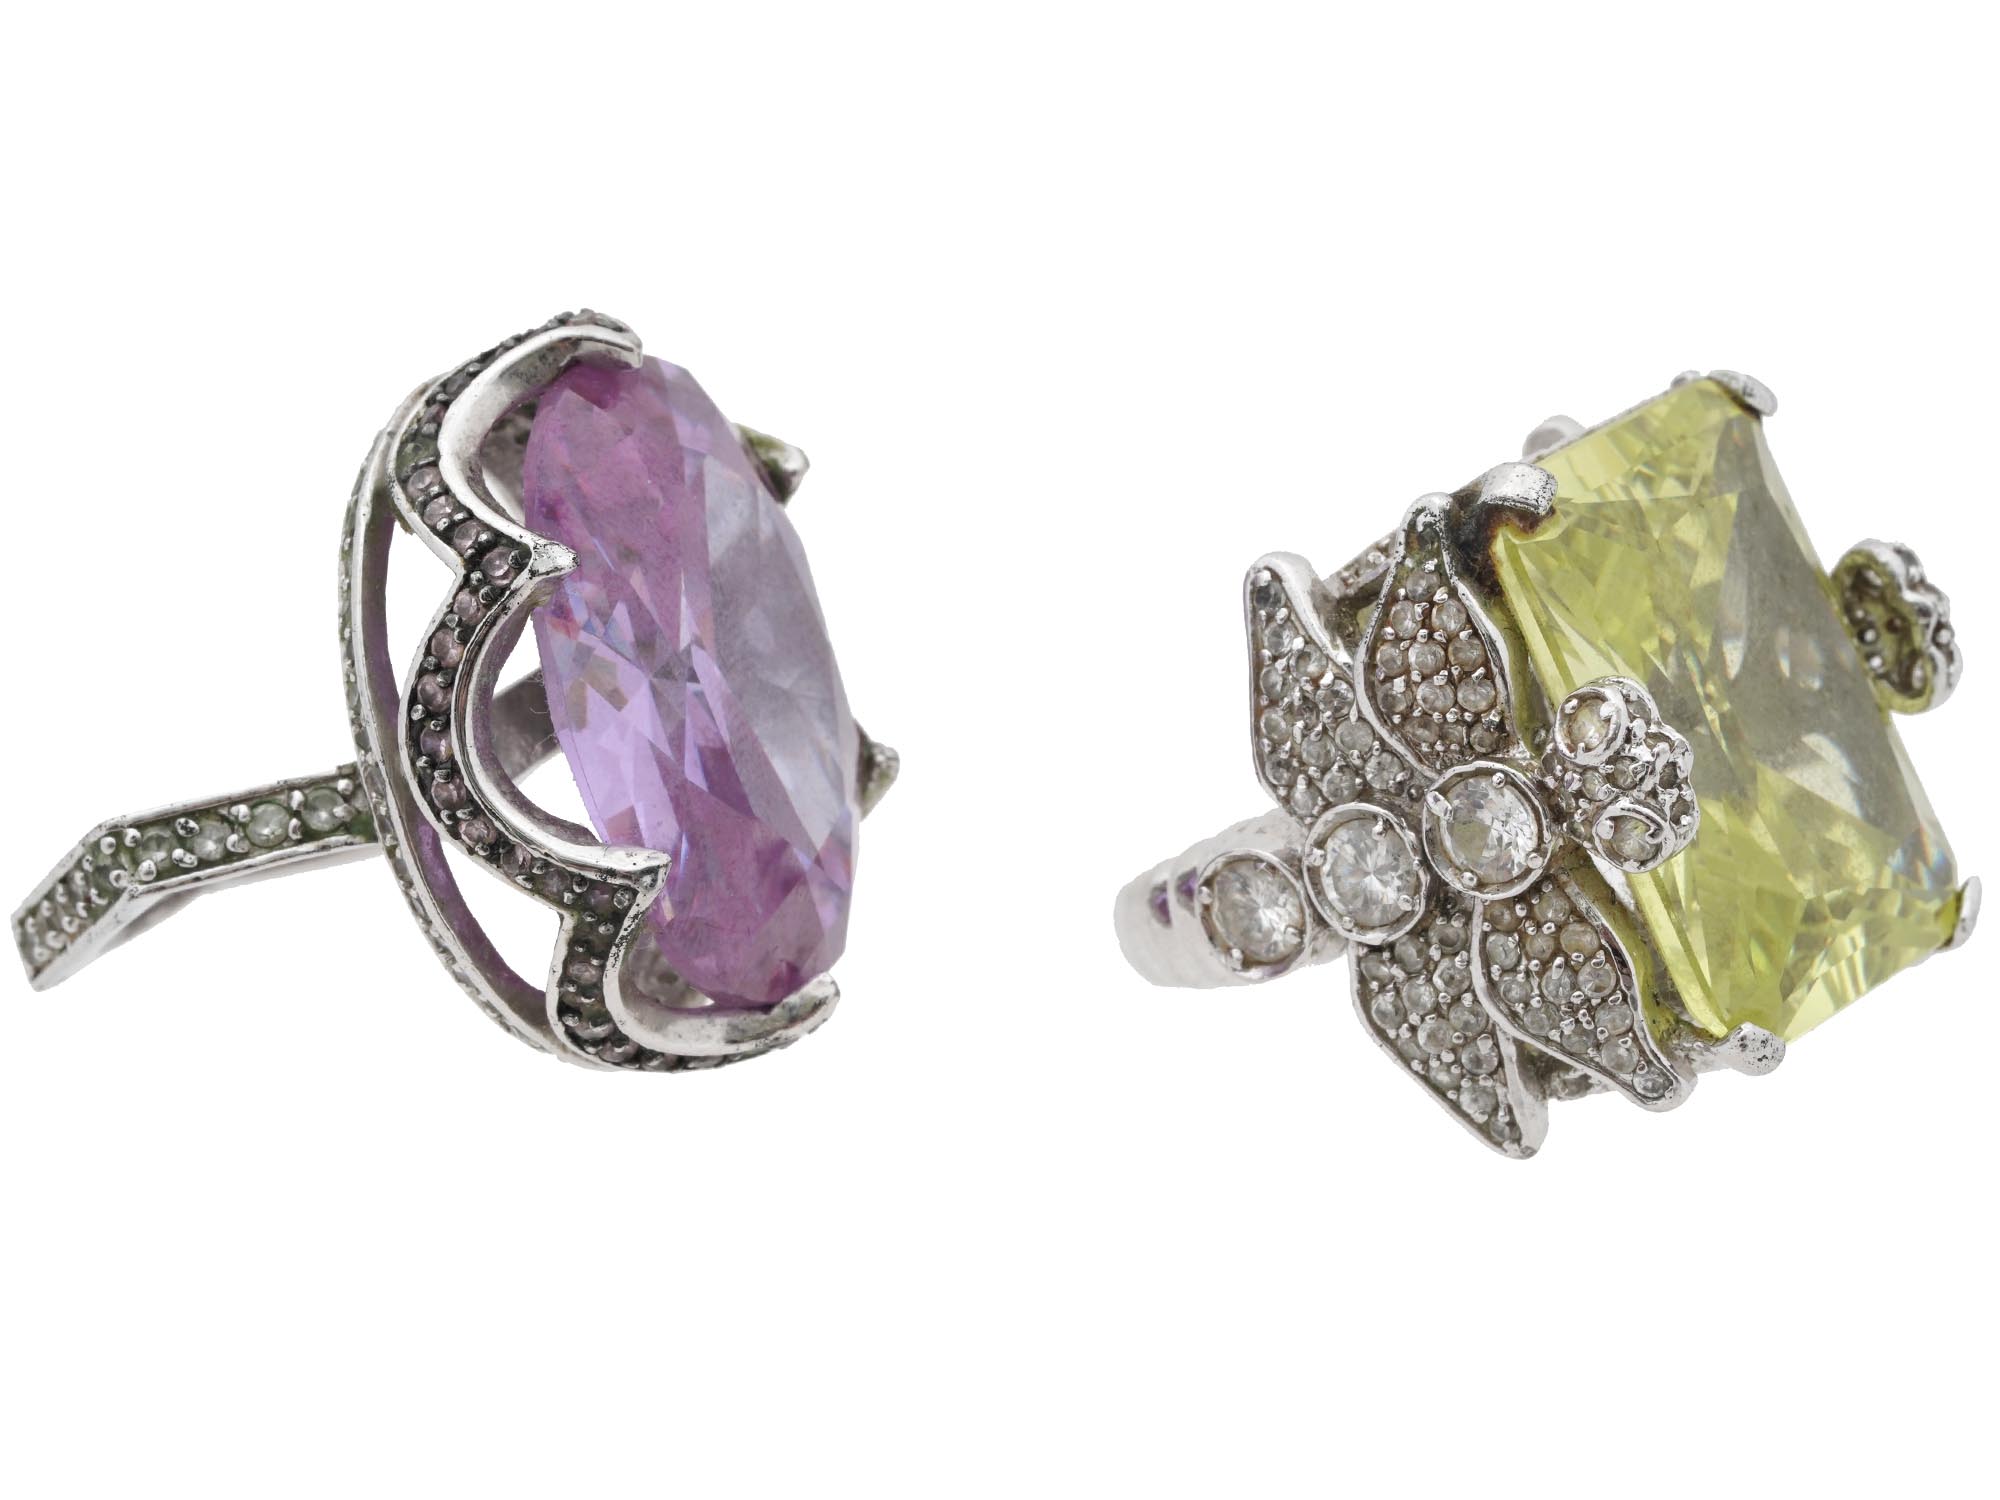 STERLING SILVER RINGS WITH AMETHYST AND CITRINE PIC-2